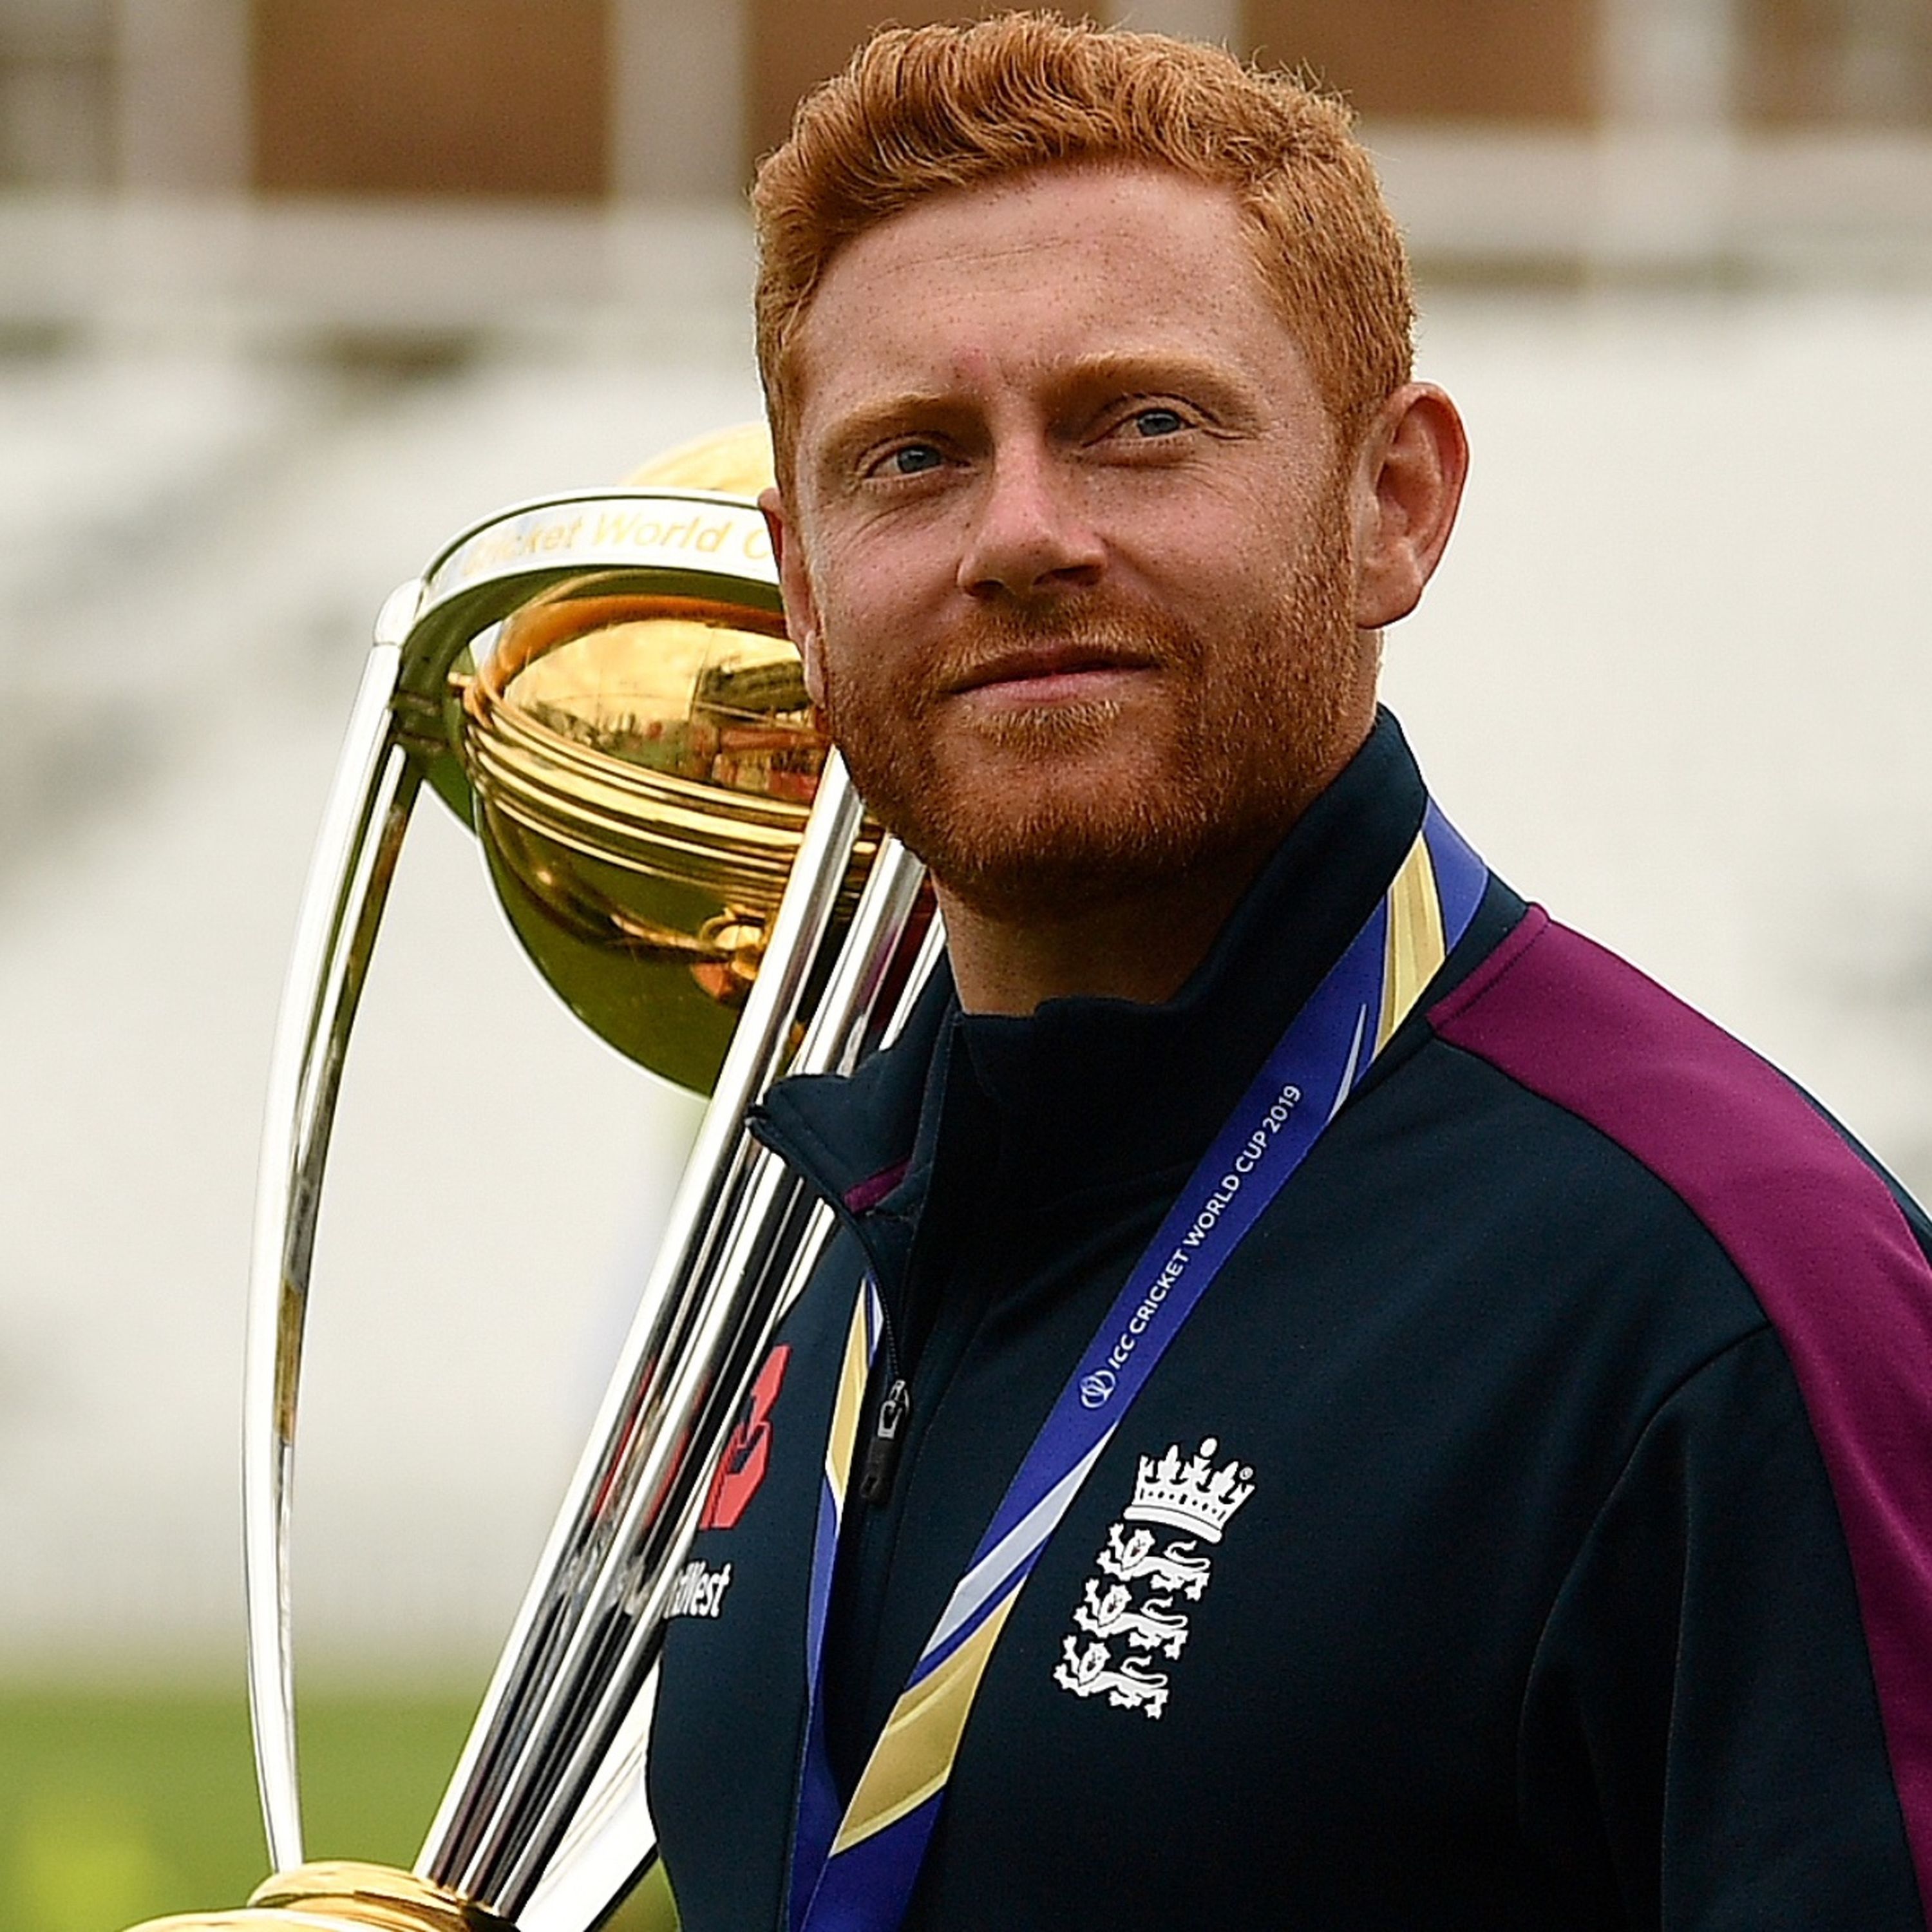 Full episode: Jonny Bairstow - Catching up with the cricket World Cup winner